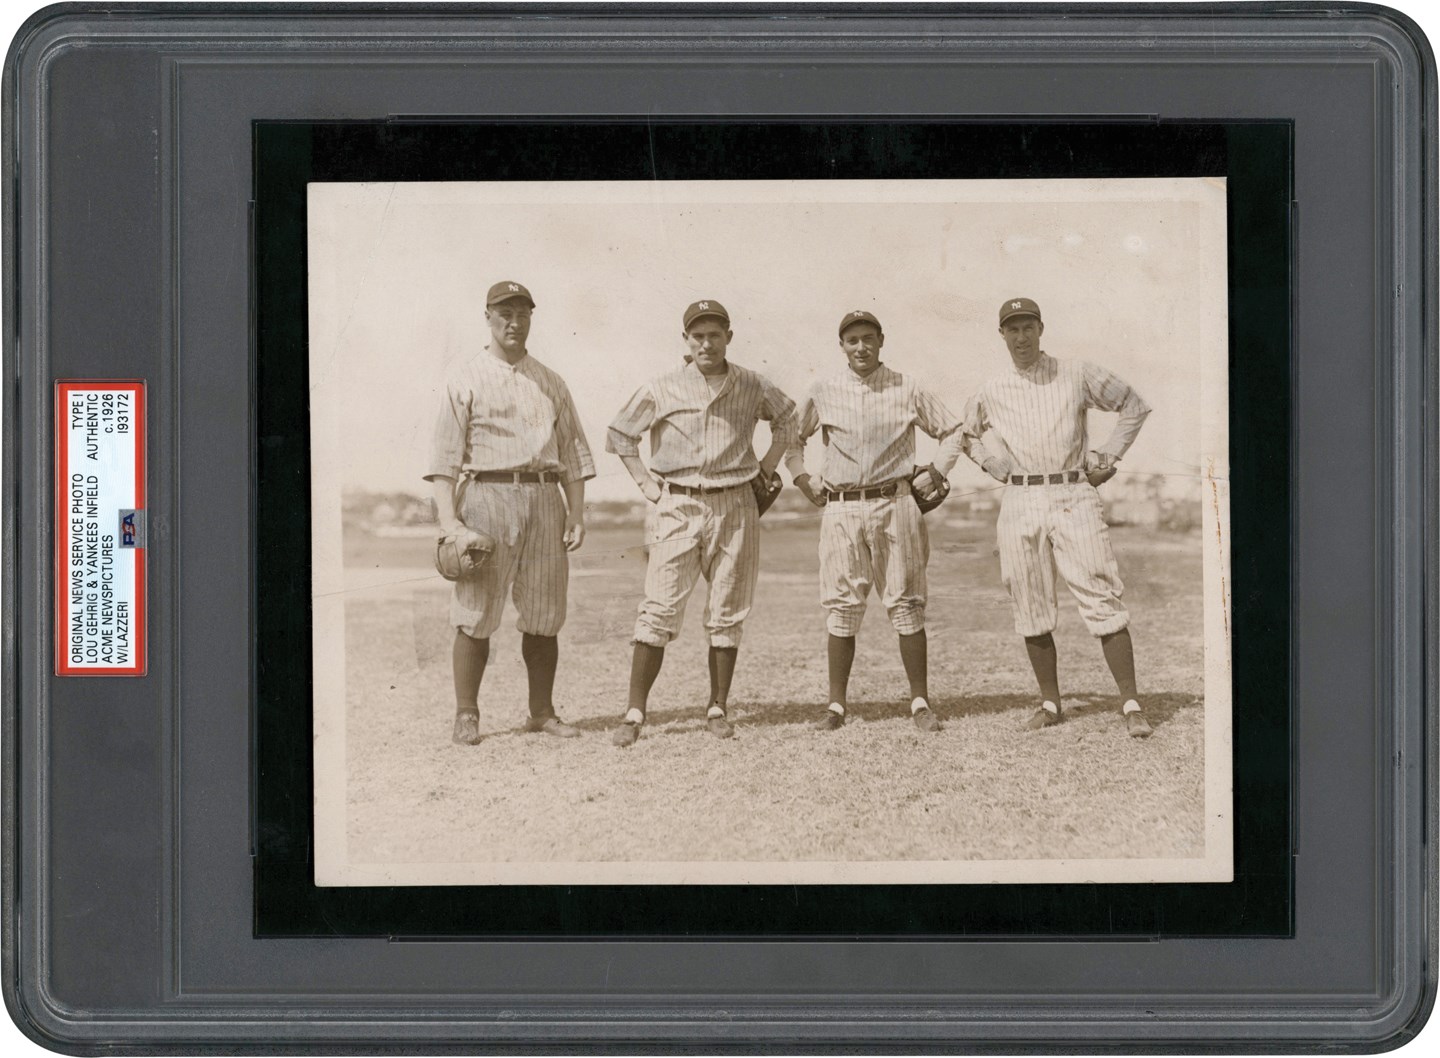 Vintage Sports Photographs - 1926-1928 Yankees Infield w/Lou Gehrig Photograph (PSA Type I)